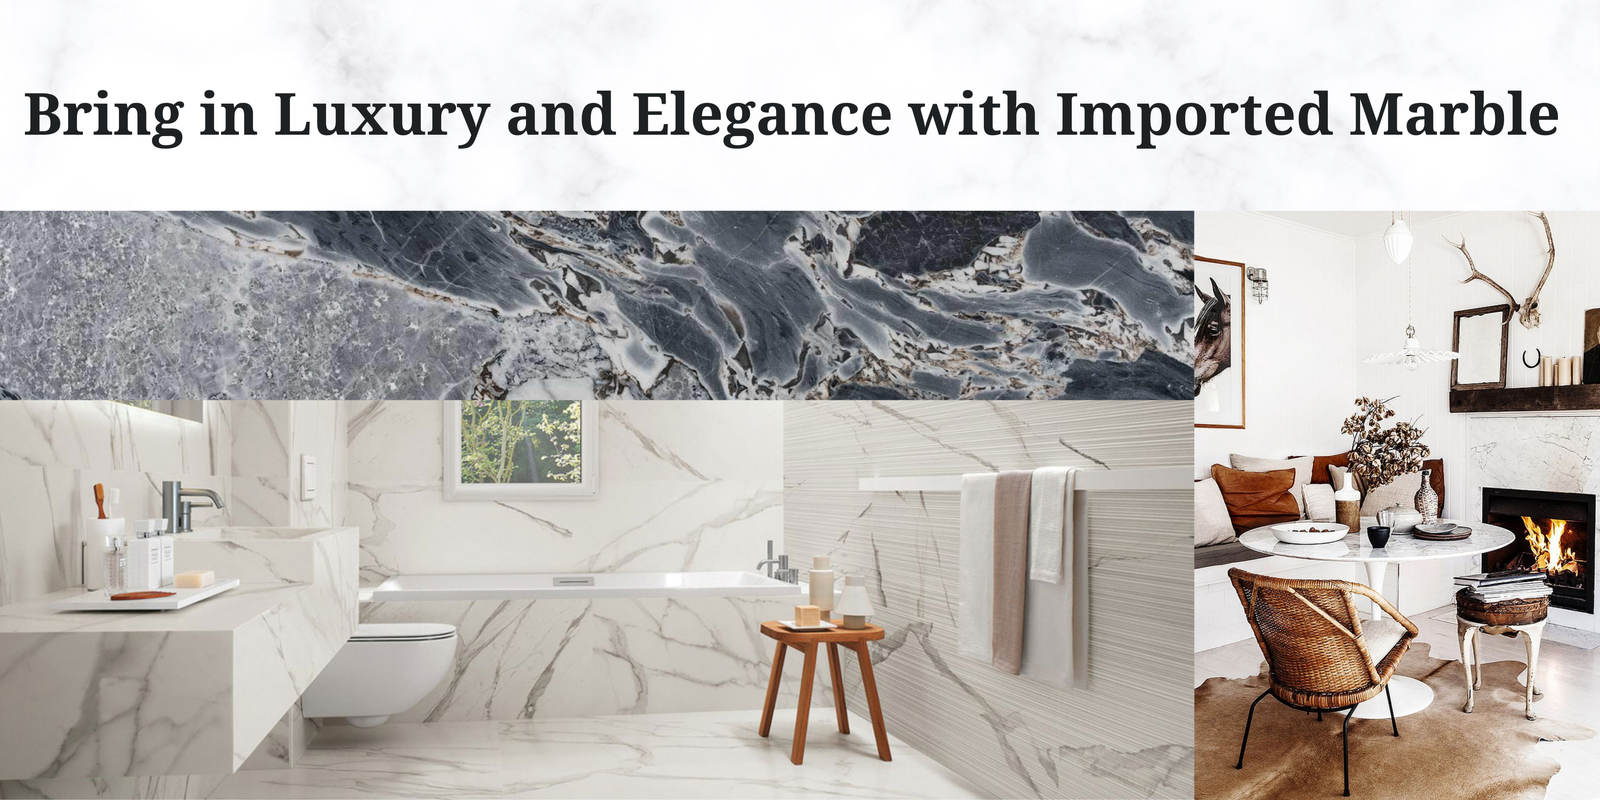 Bring in Luxury and Elegance with Imported Marble